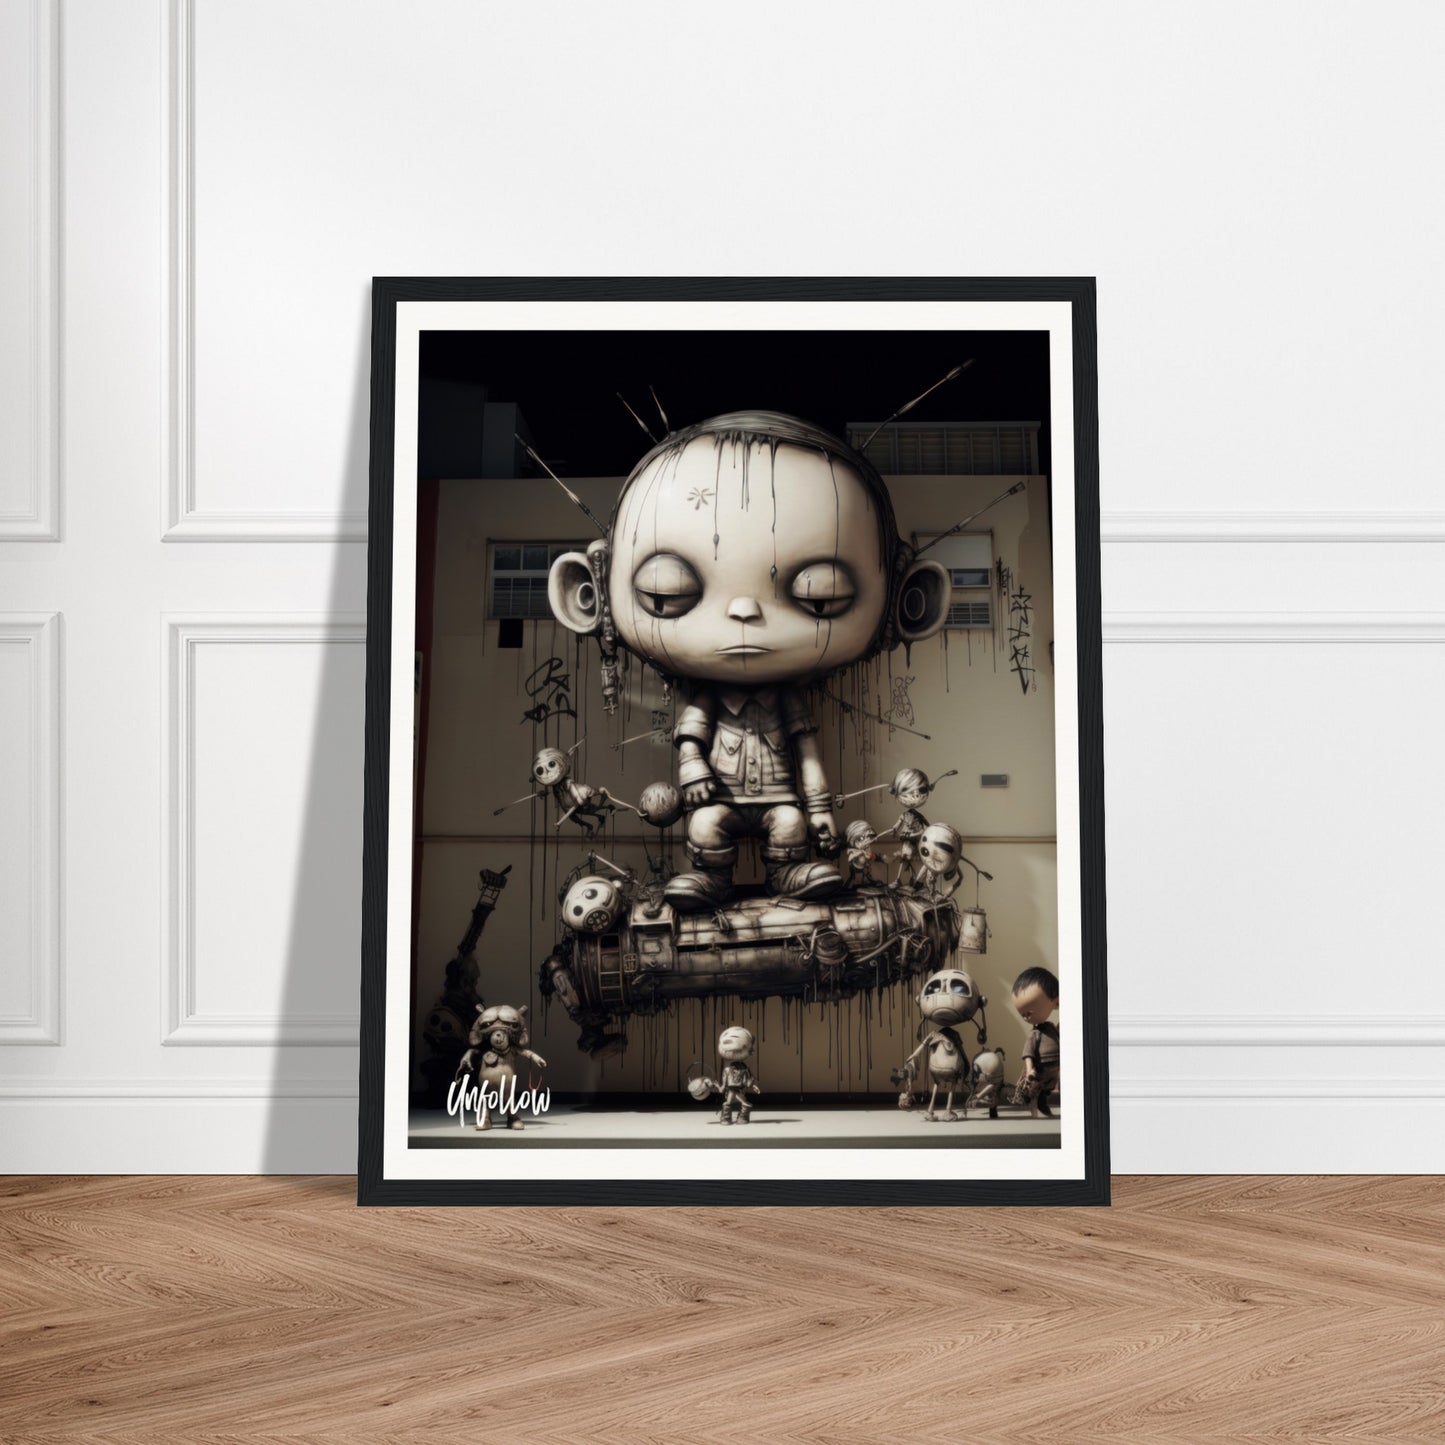 Museum-Quality Matte Paper Wooden Framed Poster 40x50cm/16x20"